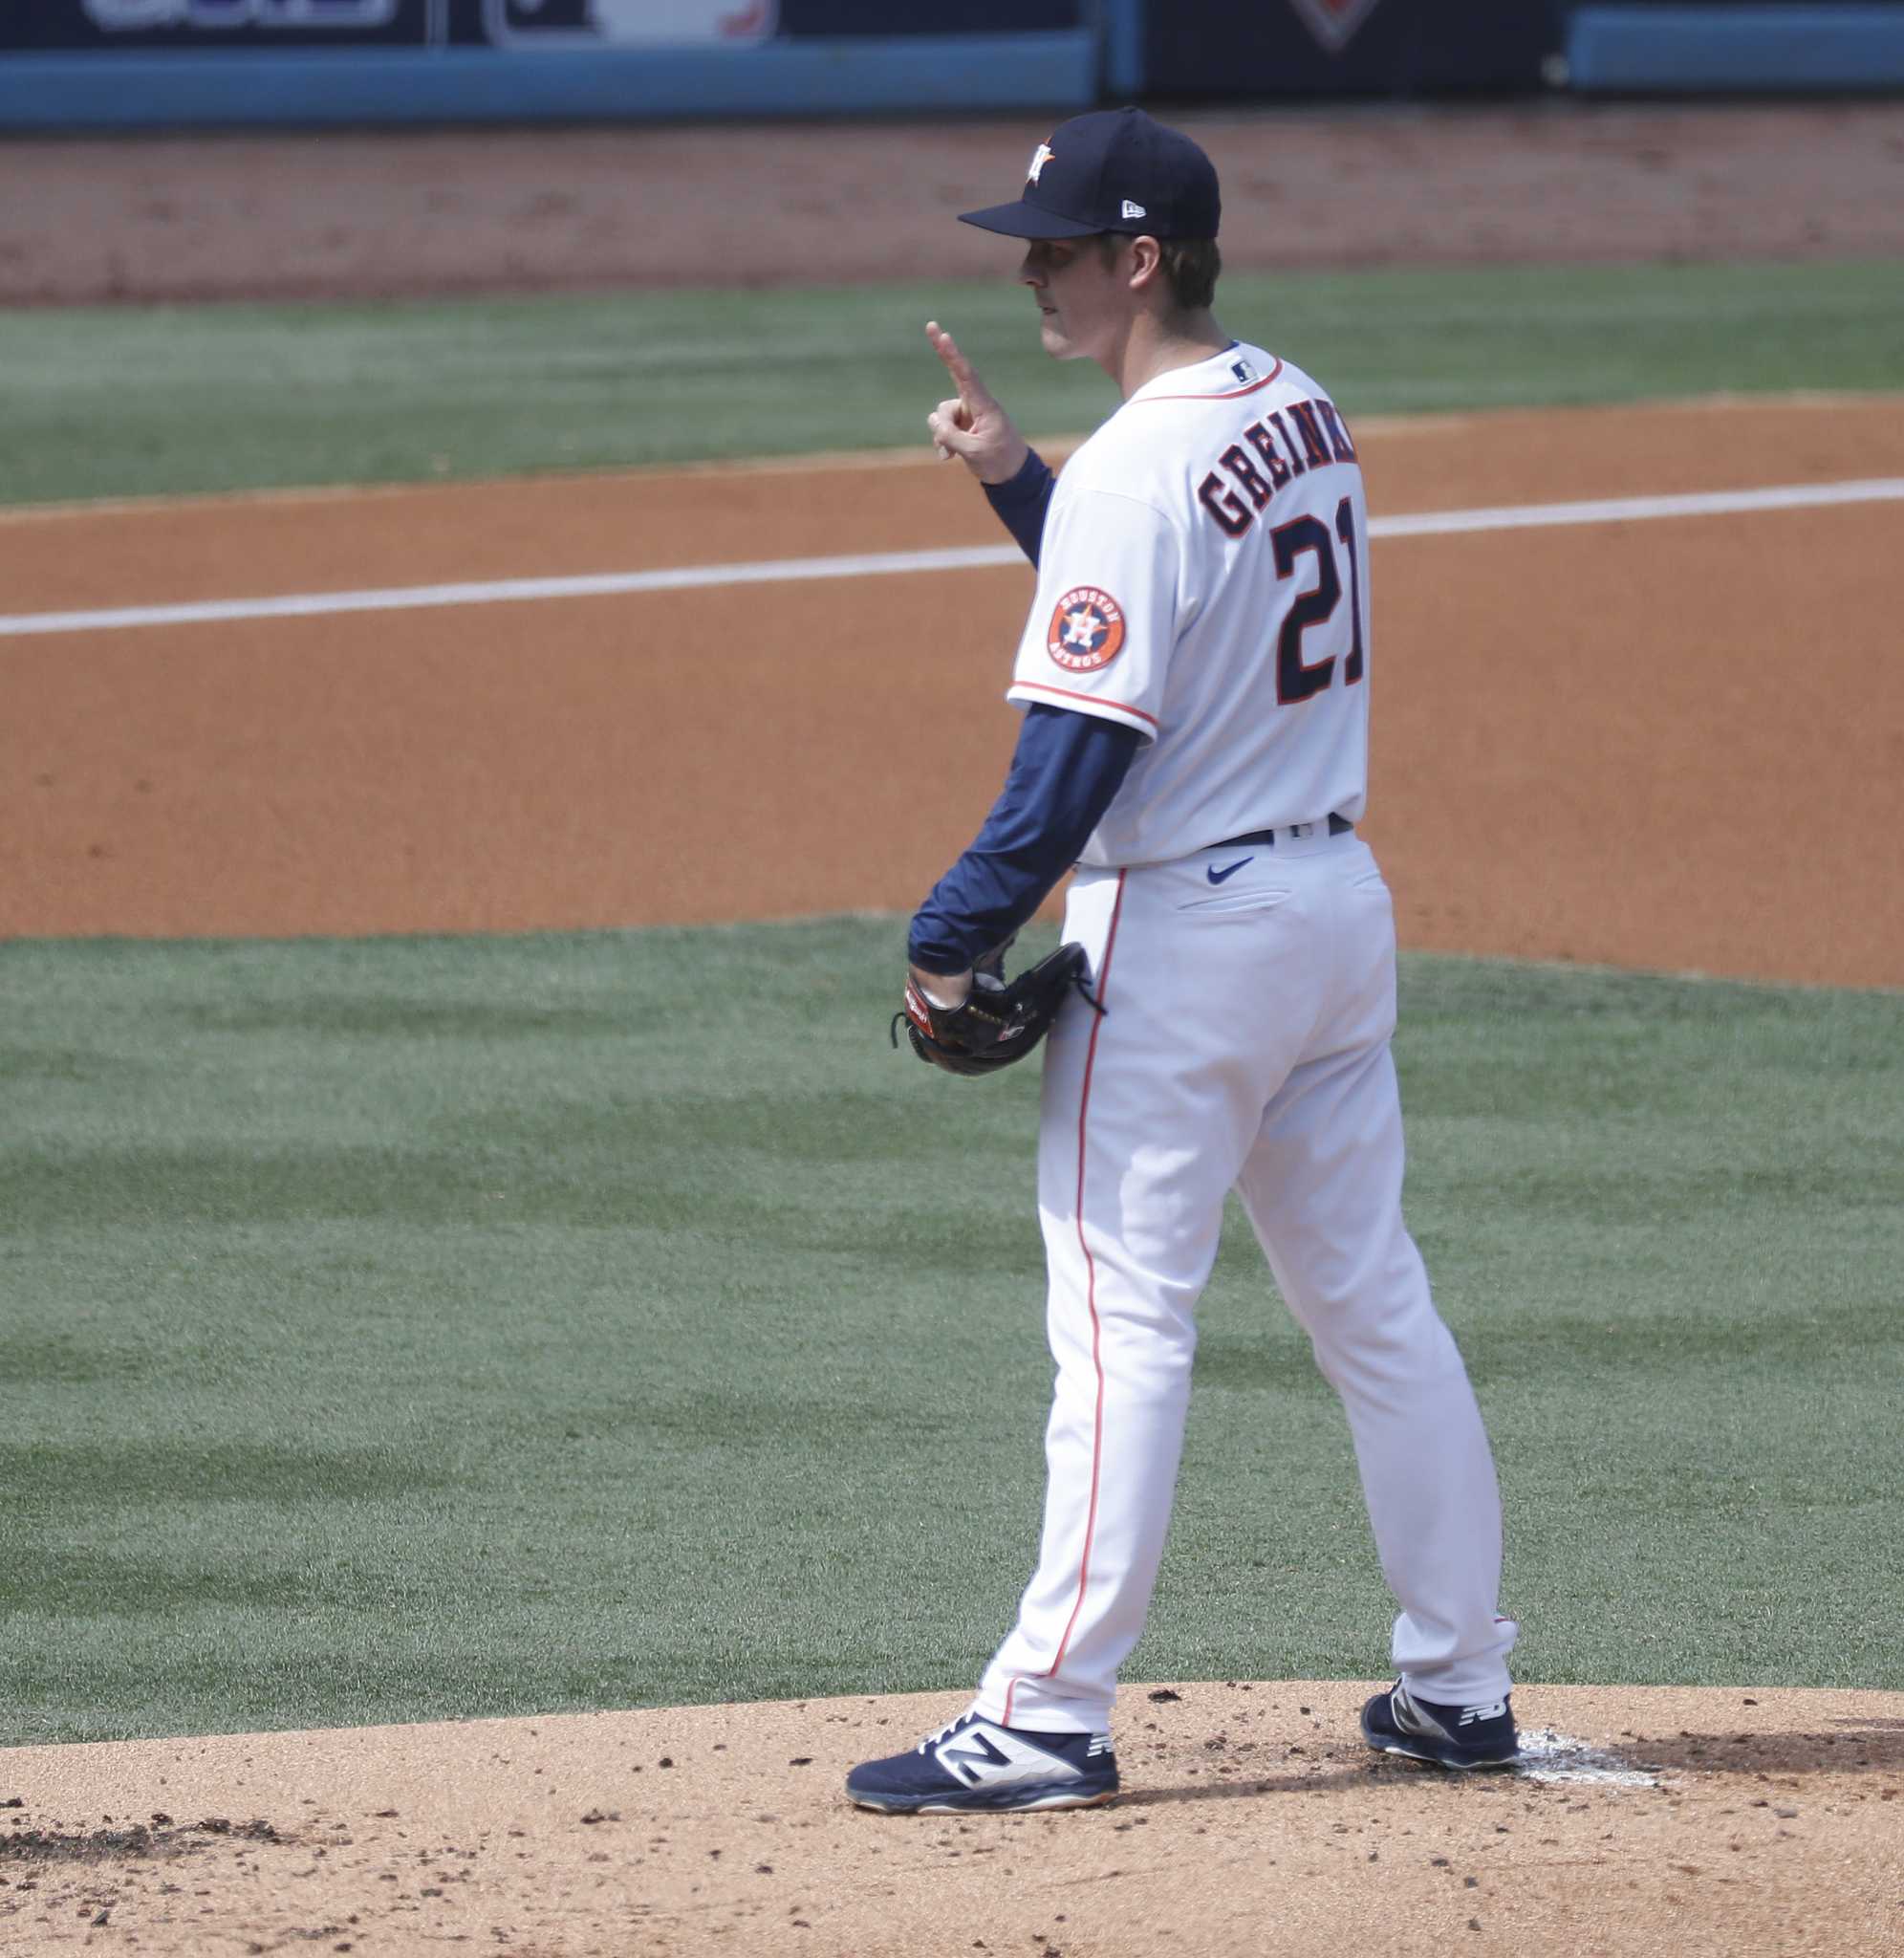 Did Astros' Zack Greinke call his pitches against the A's?